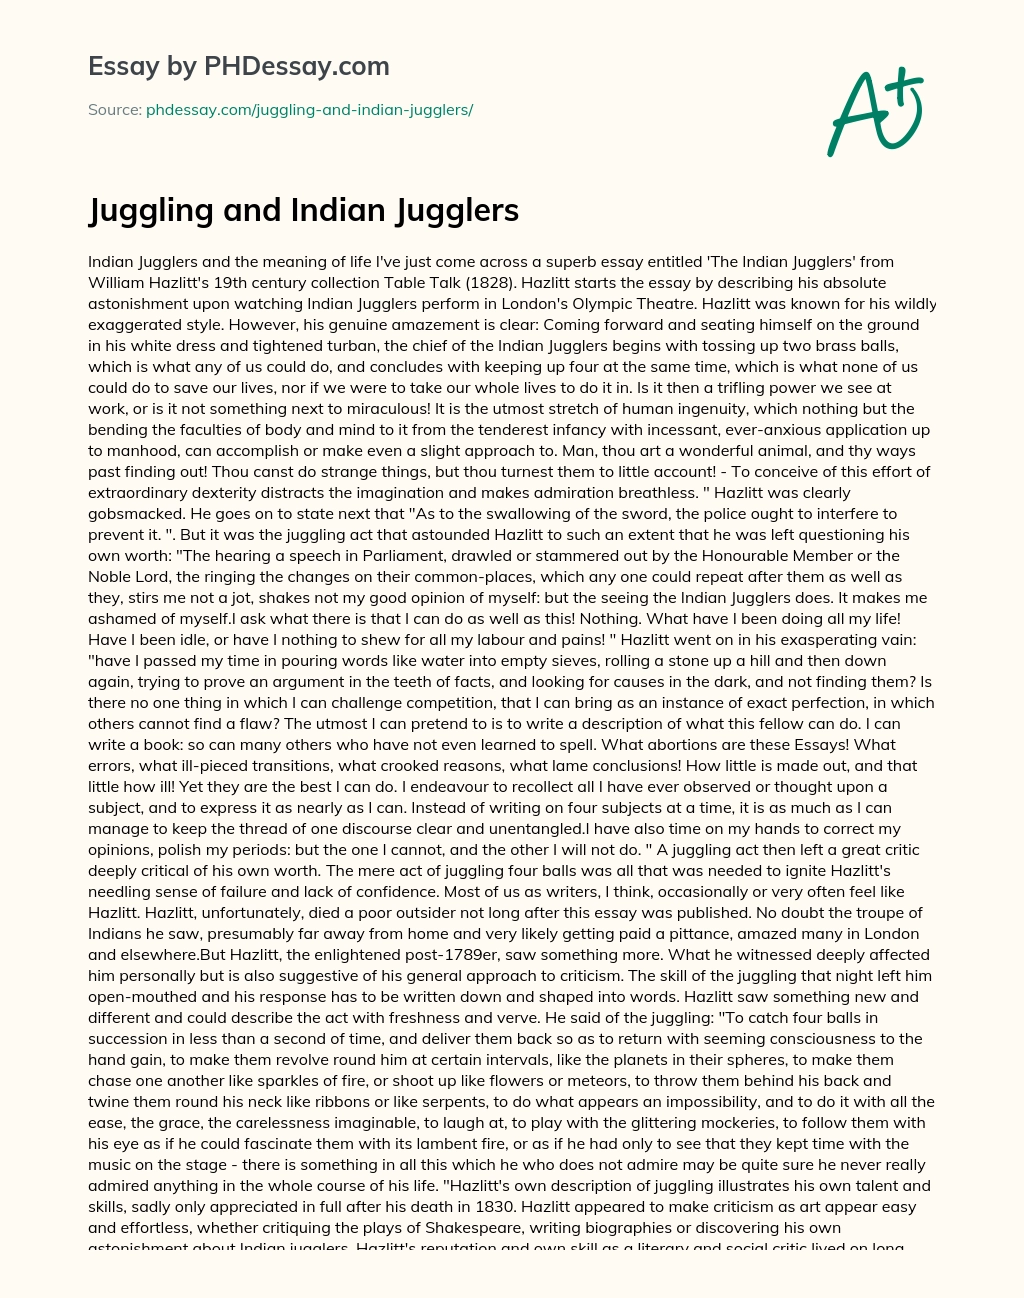 Juggling and Indian Jugglers essay